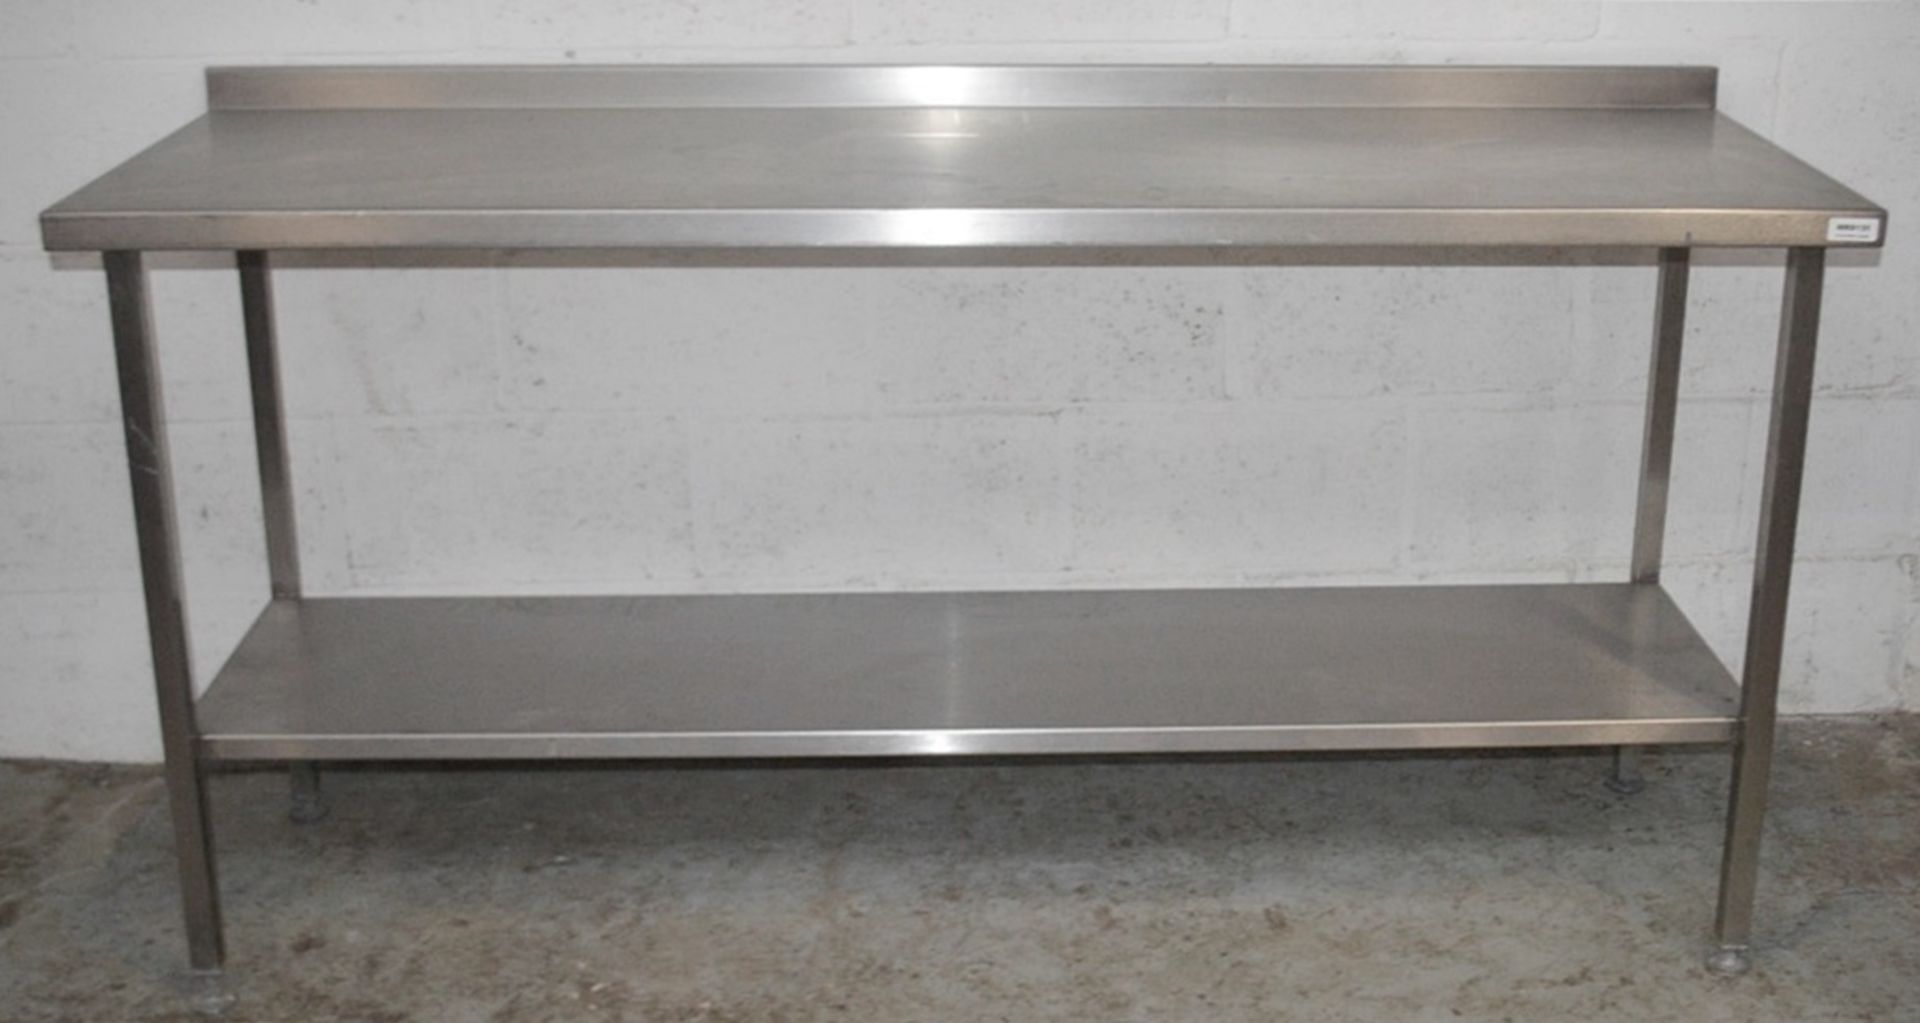 1 x Stainless Steel Long Commercial Kitchen Prep Bench With Upstand - Dimensions: H90 x W180 x D60cm